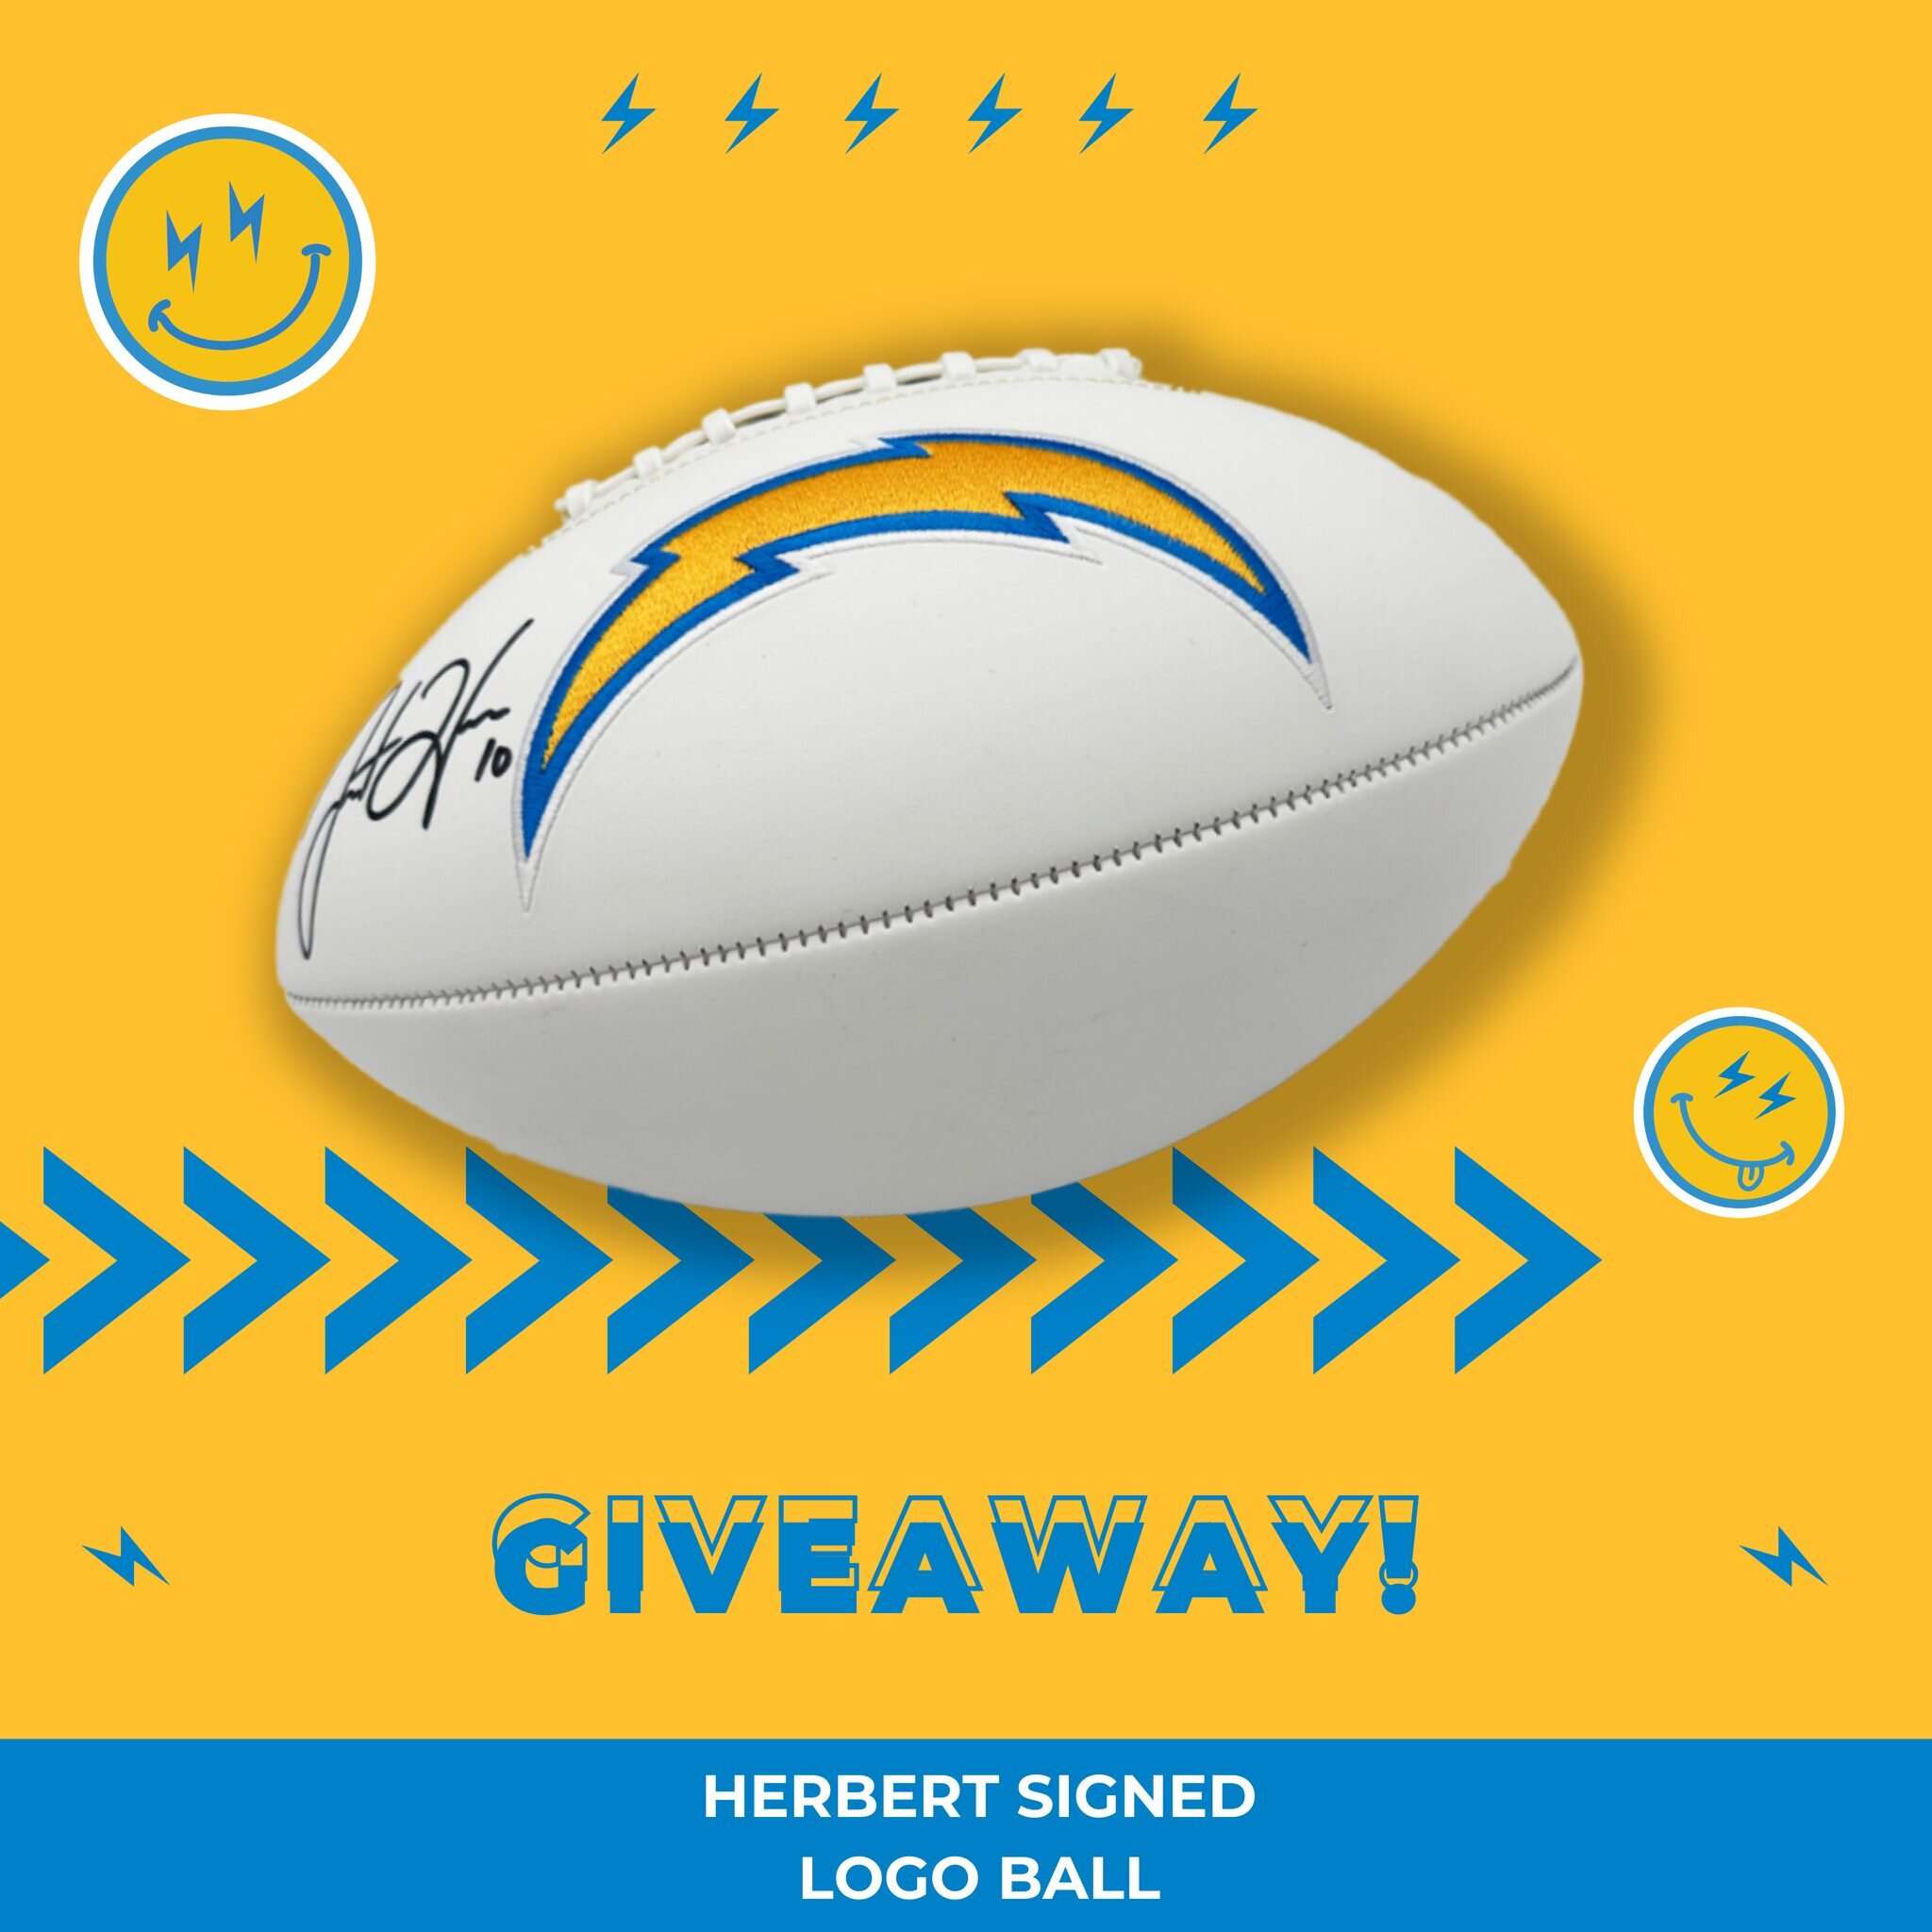 ⚡️LAST CHANGE to WIN this exclusive HERBERT ✍️ Logo Ball giveaway! ⚡️

🏈 Don't miss your chance to add a piece of Chargers history to your collection! Enter now through the CHARGERS⚡️ team mobile app ➡️ Bolts Bids ➡️ Filter ➡️ Giveaways, or visit ch